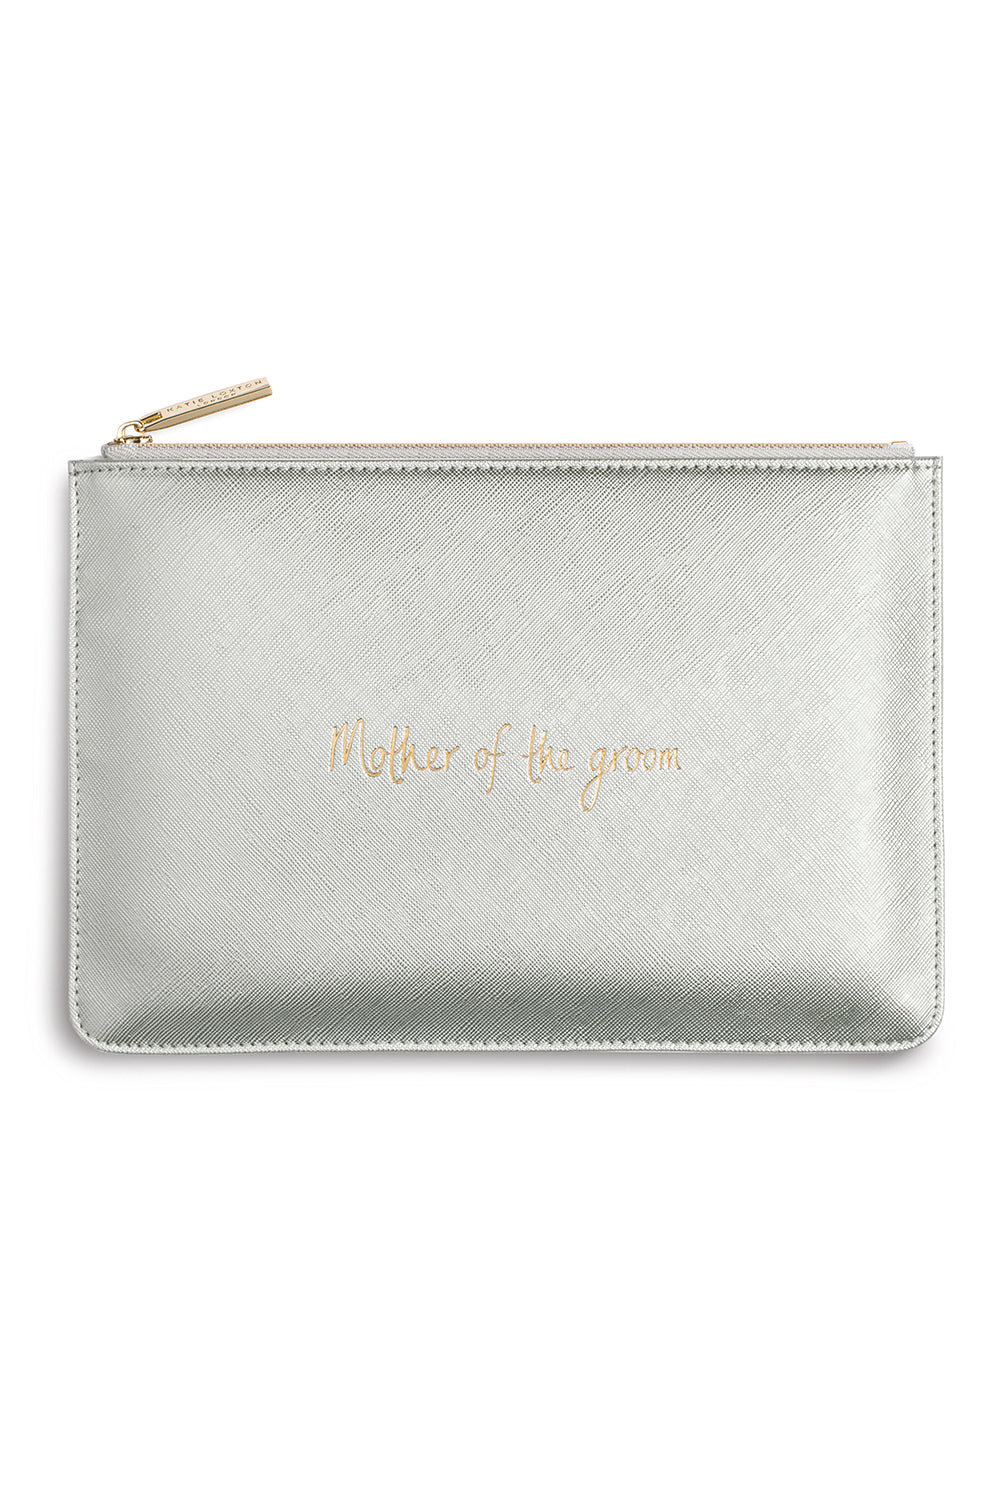 Perfect Pouch - Mother of the Groom